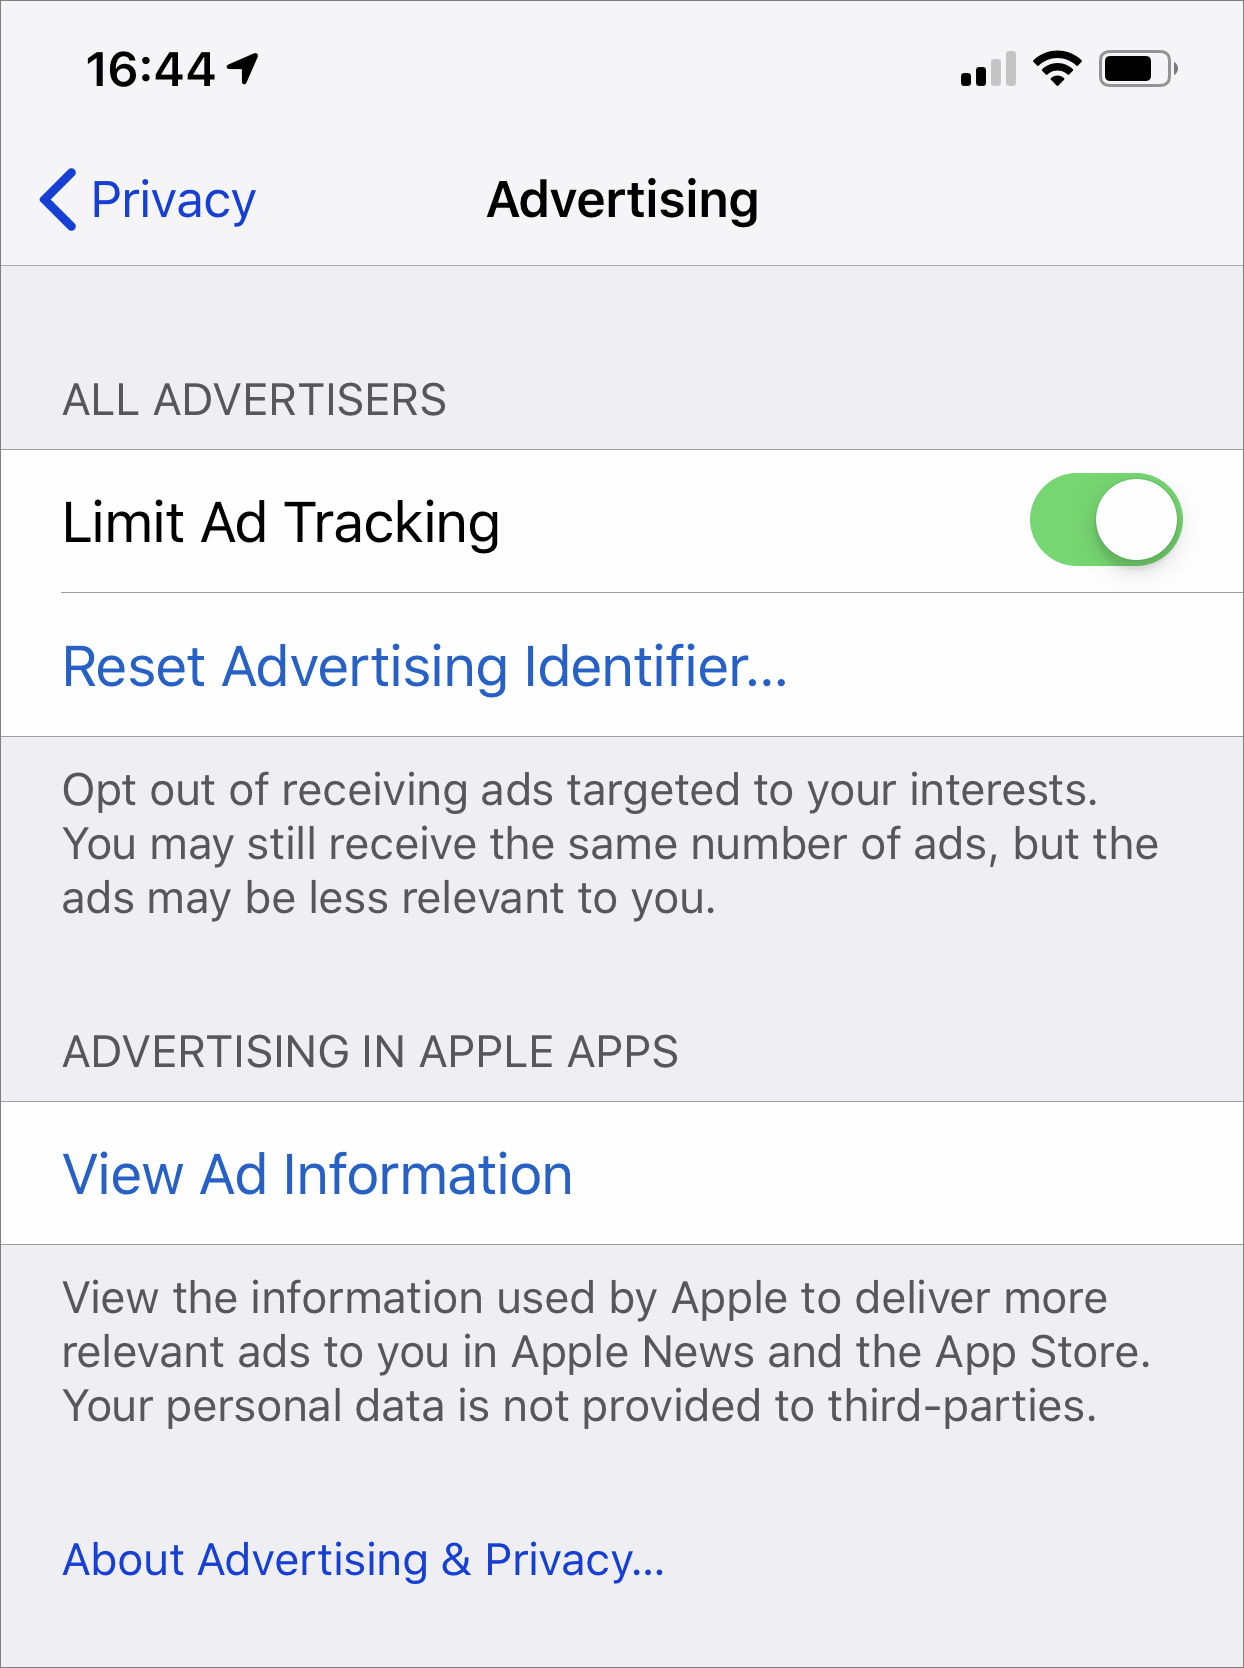 Apple simplifies Face ID, iOS 12 and recycling in new ads